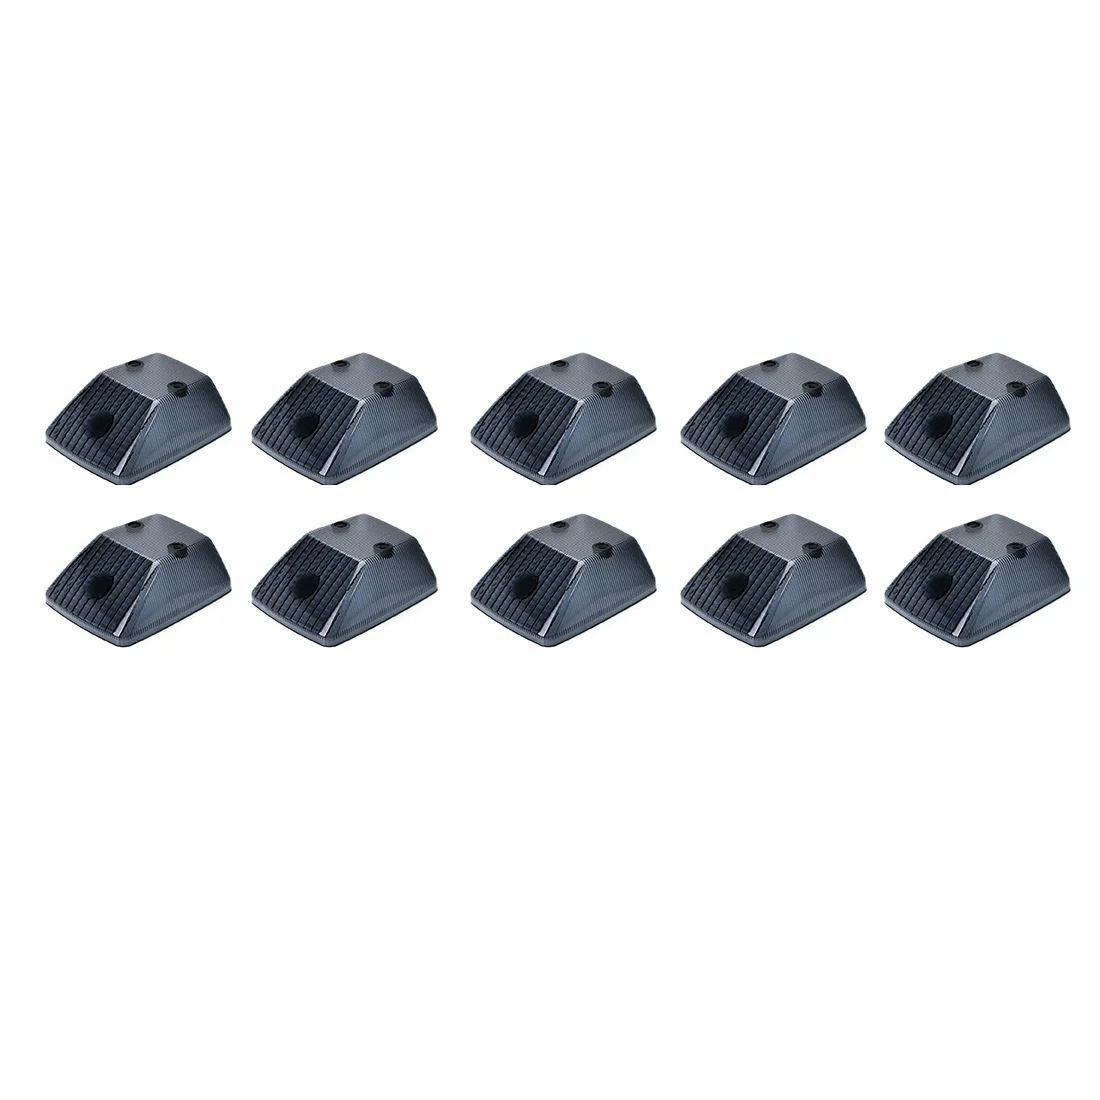 

10PCS Car Front Turn Signal Lamp Lenses Corner Lamp Cover A4638260057 for Mercedes Benz W463 G-Cl G500 G550 1986-2018